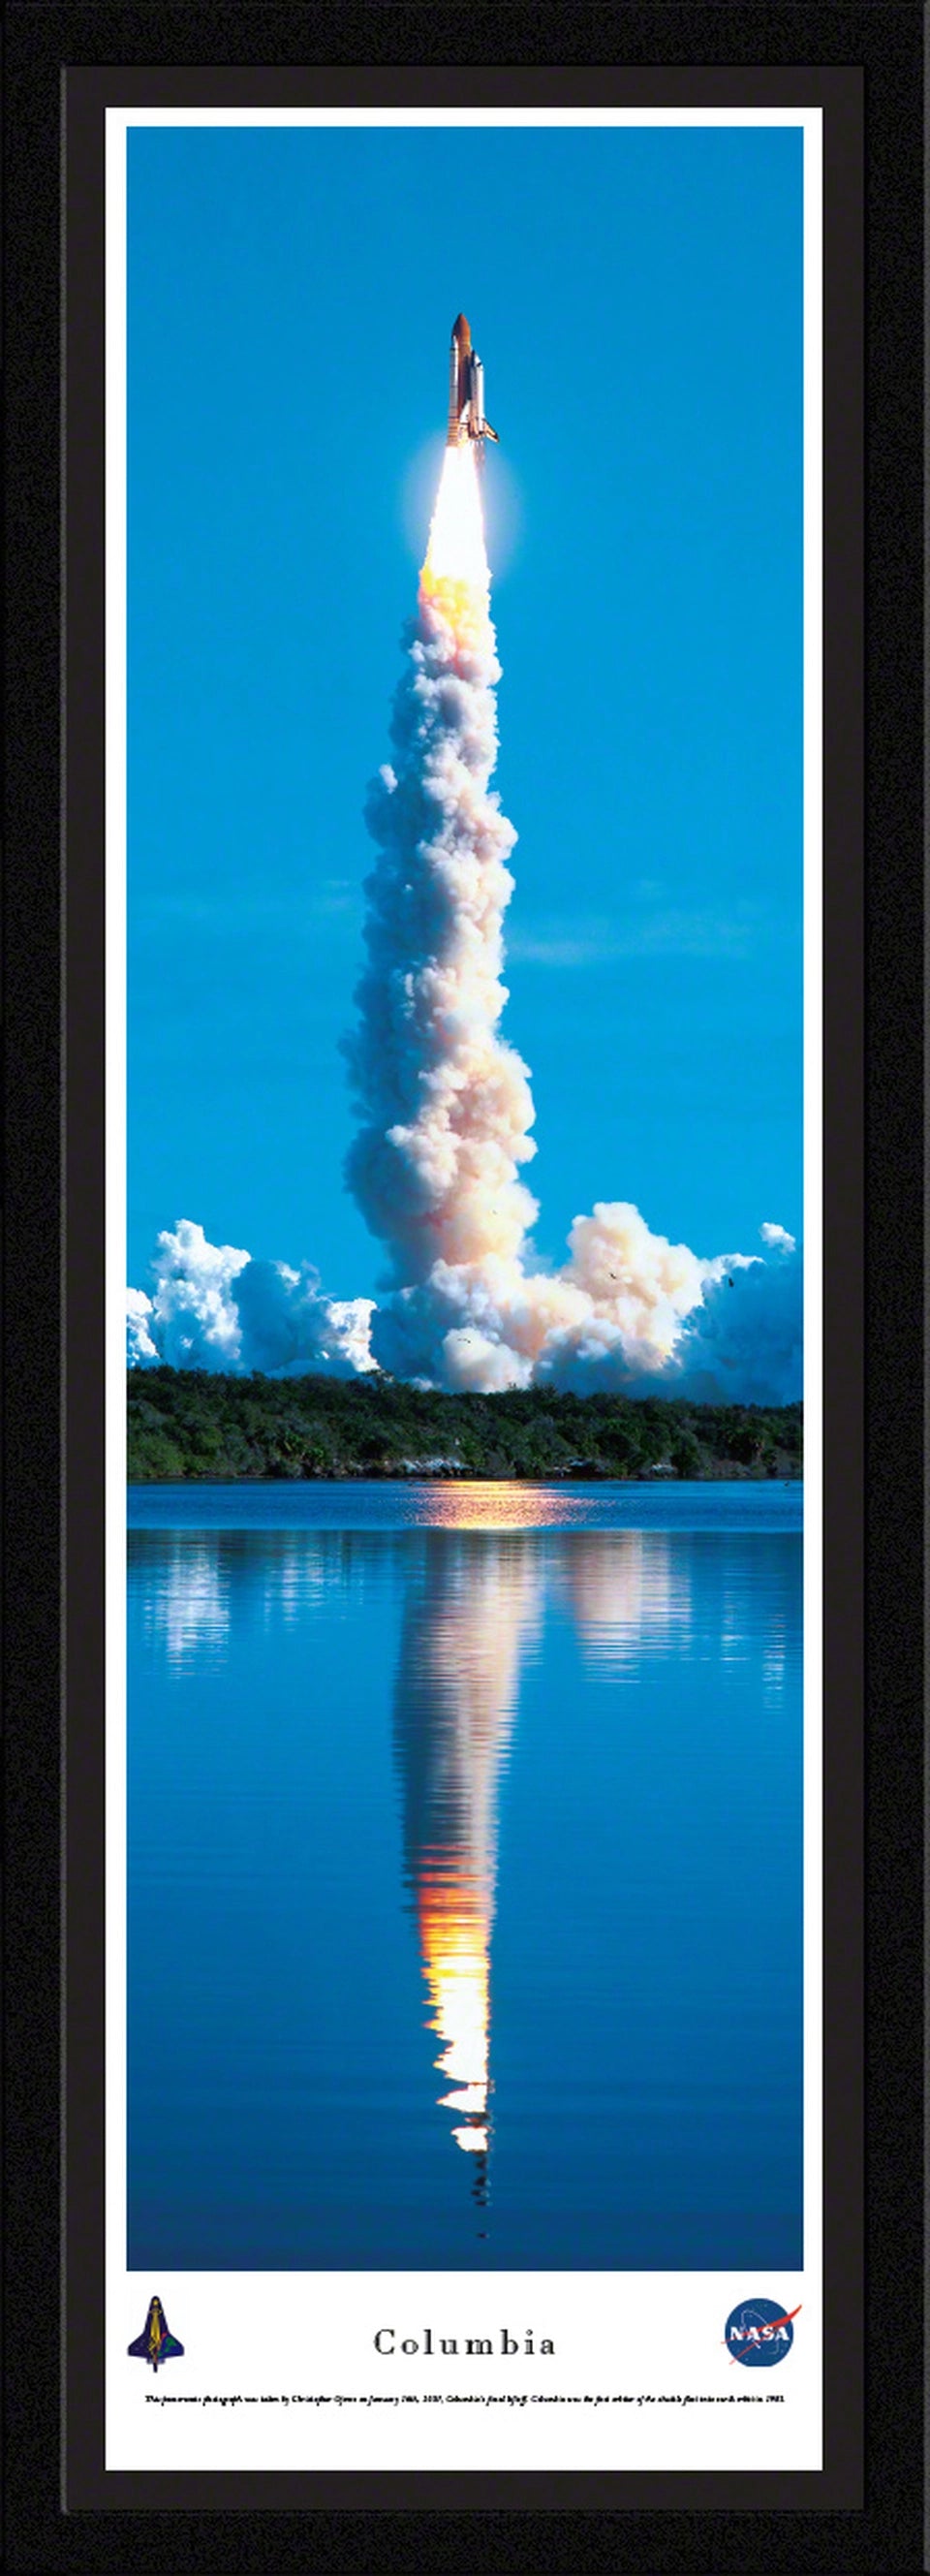 Columbia Space Shuttle Panoramic Picture - Liftoff - Vertical Panorama by Blakeway Panoramas